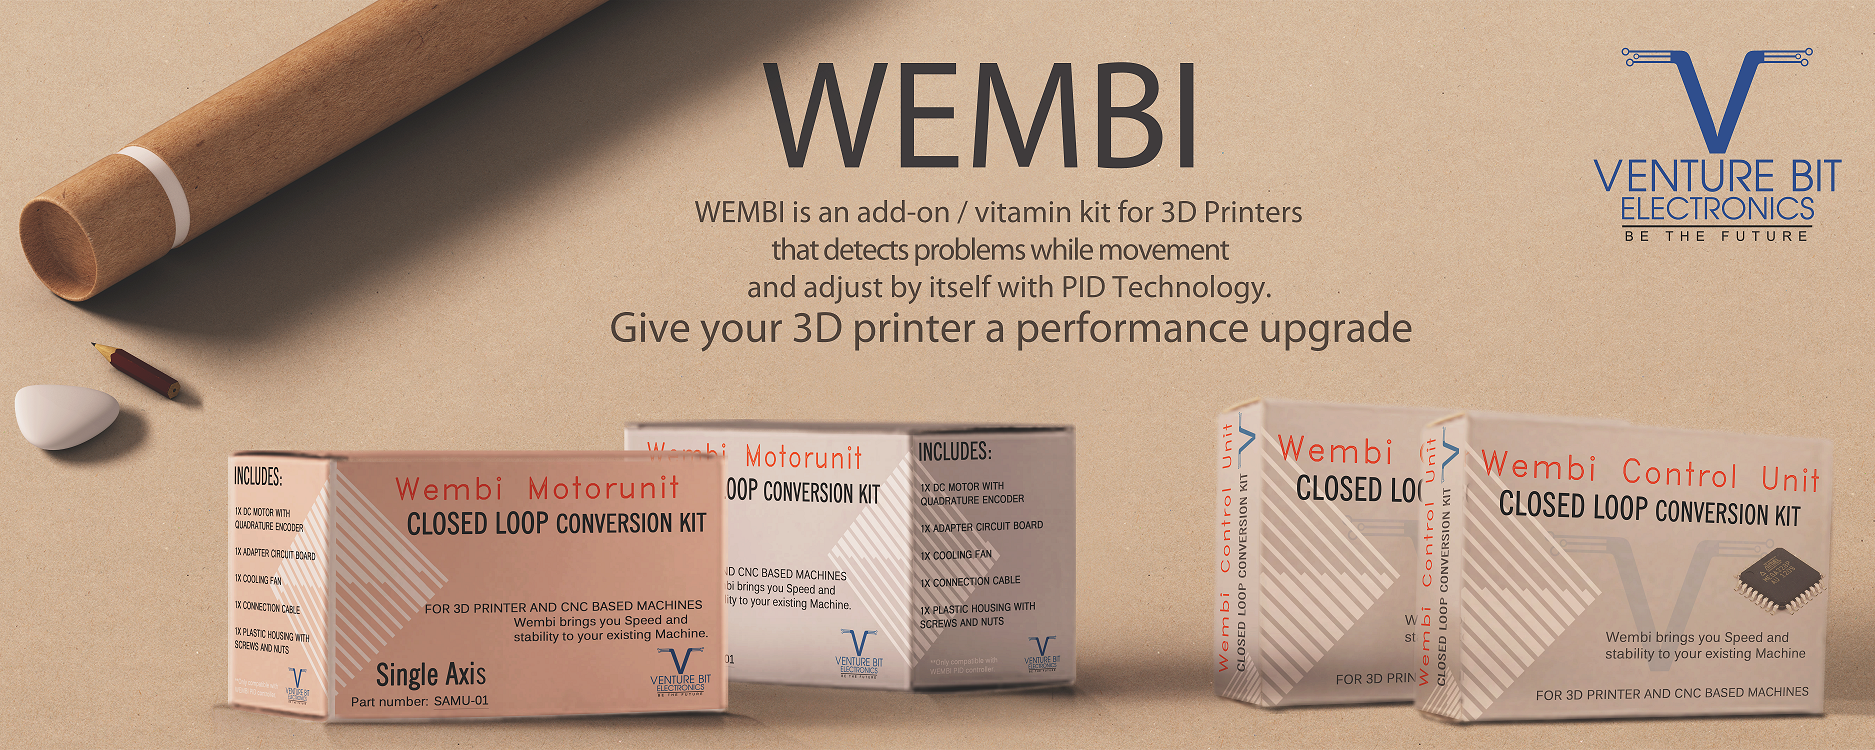 Meet Wembi – The World’s First, Closed Loop Conversion Kit for 3D Printer